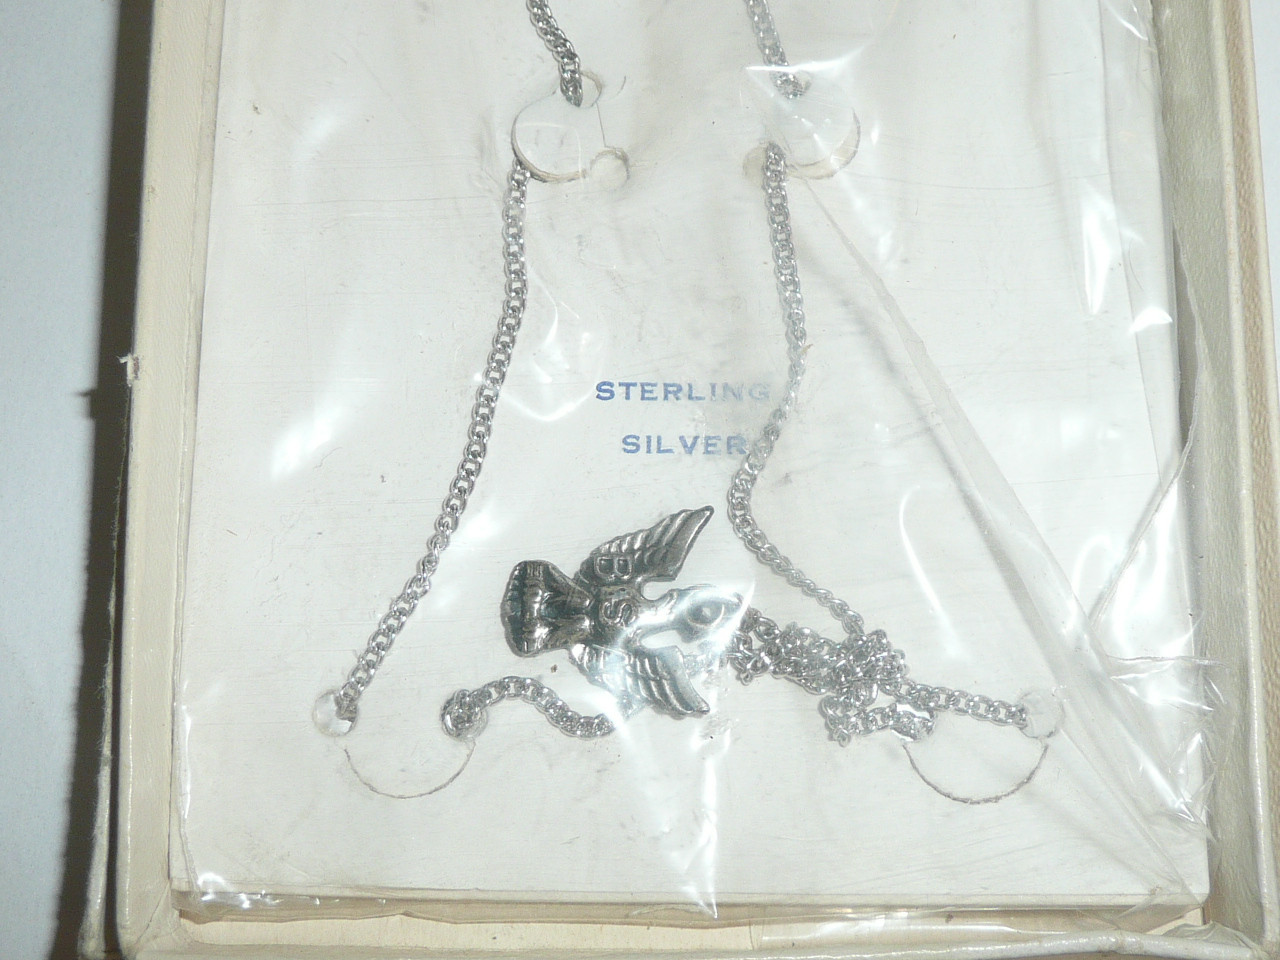 Eagle Scout Charm on Necklace, STERLING Silver, BSA on Chest, National Issue, New in Box